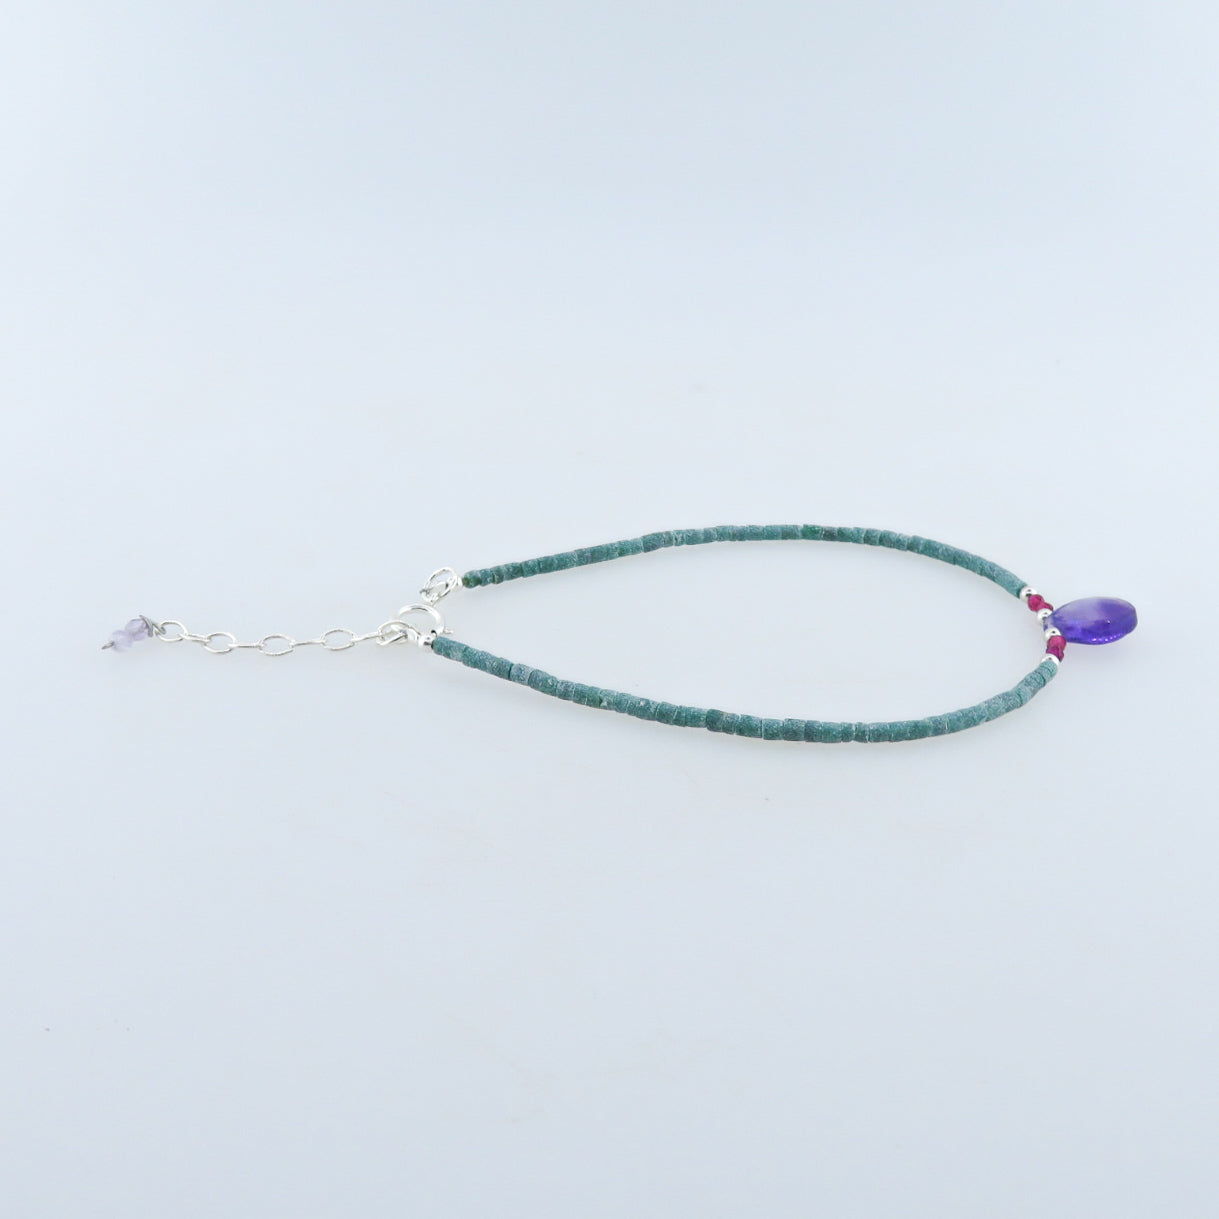 Emerald Bracelet with Amethyst, Garnet and Silver Beads